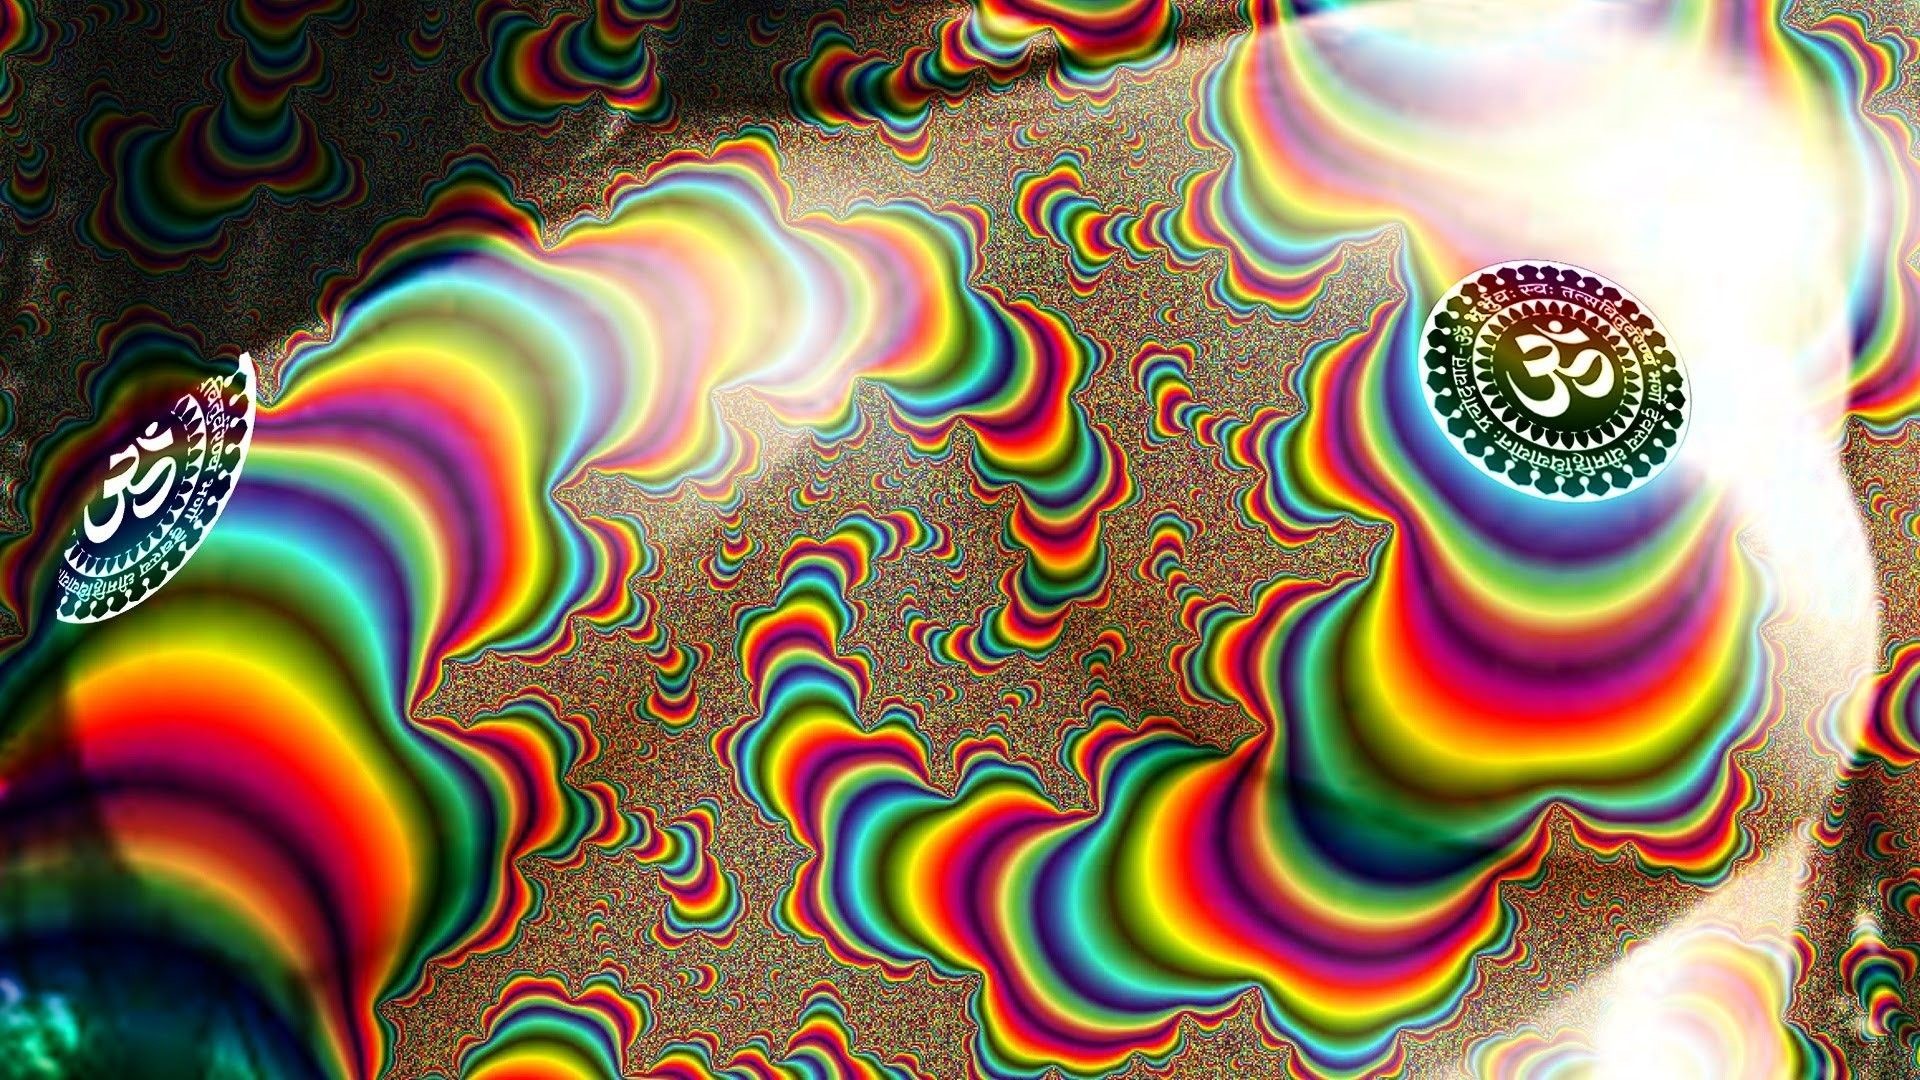 1920x1080 1920x1200 Acid Trip Wallpapers Backgrounds Top Rated Images Free Download">